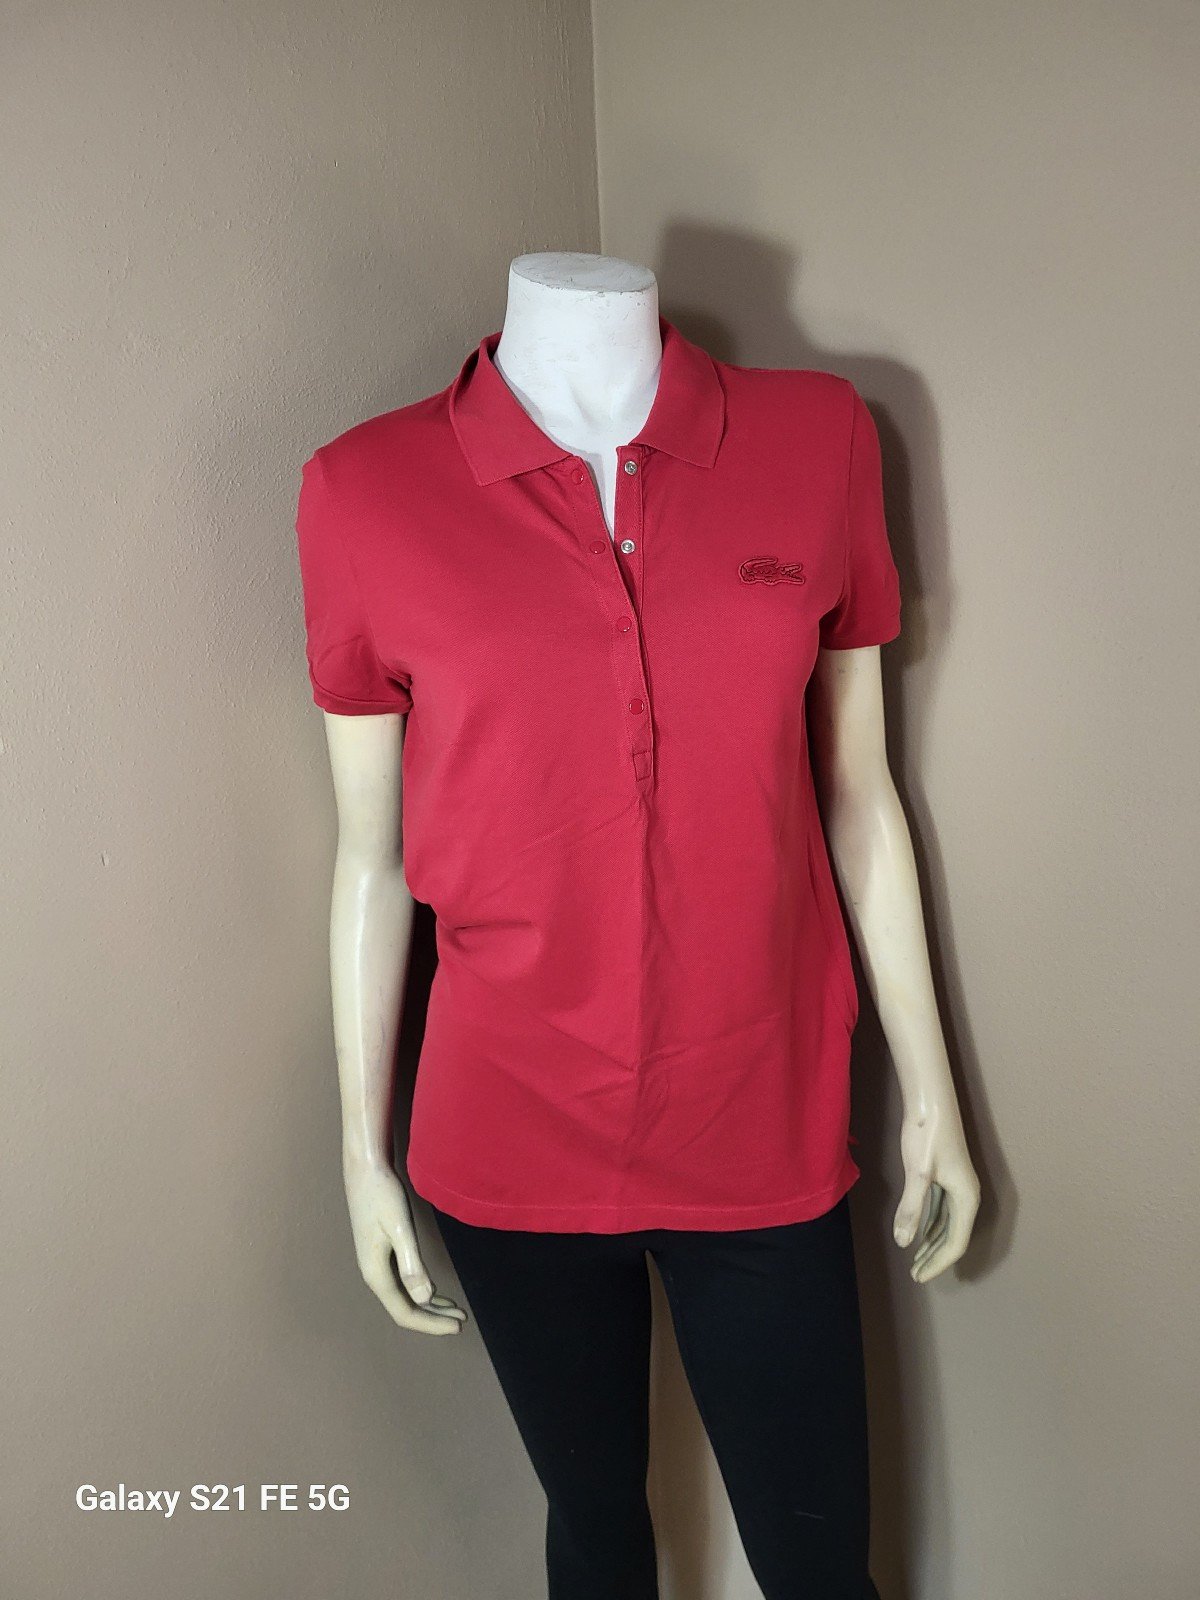 Promotions  Lacoste Womens Pink Polo Shirt Sz 42/L
.in Great Condition...no holes spots and FXzXywXmm Great